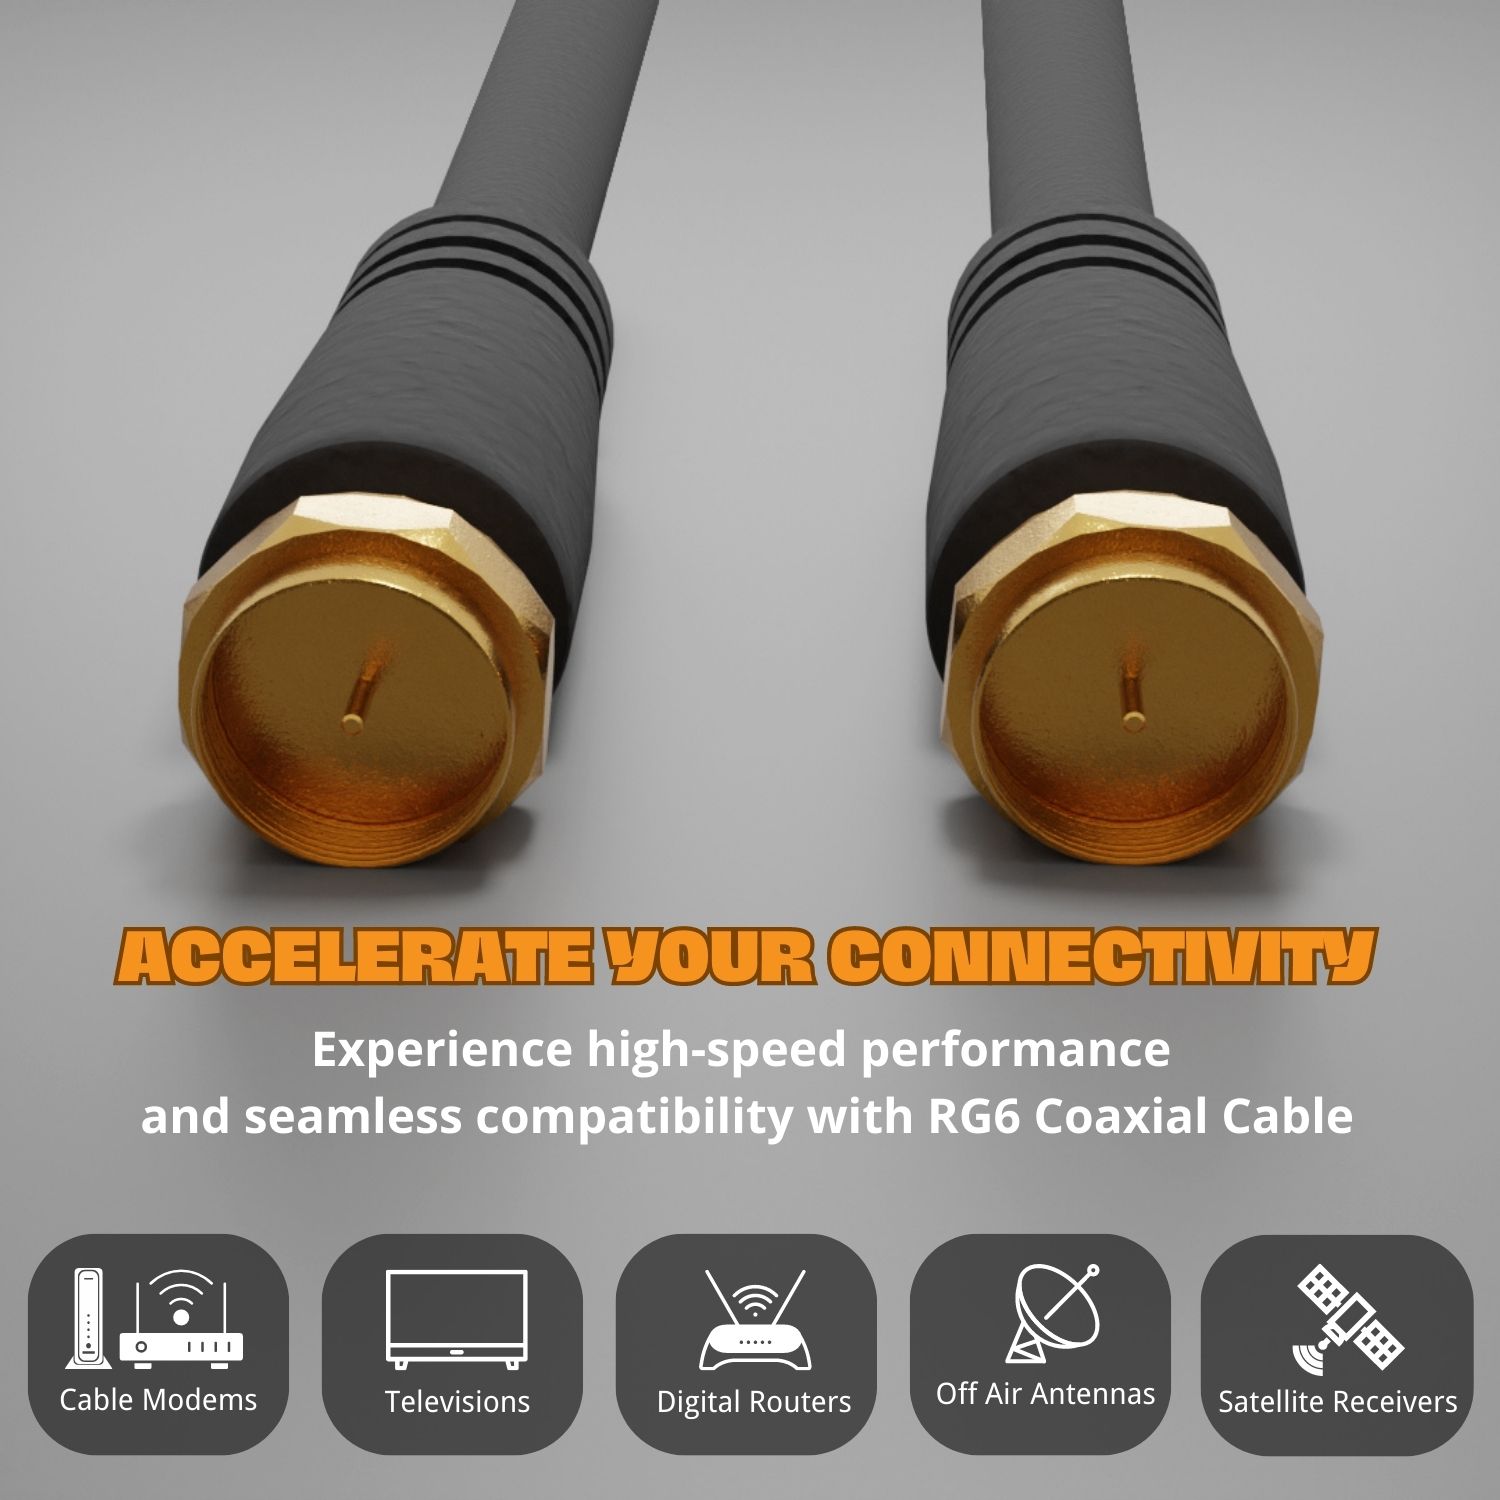 High Speed Coaxial Cable - Our RG6 Coax Cable ensures accurate video signal transfer with pristine audio quality for a range of devices such as digital TV, satellite TV, AV audio systems, and more